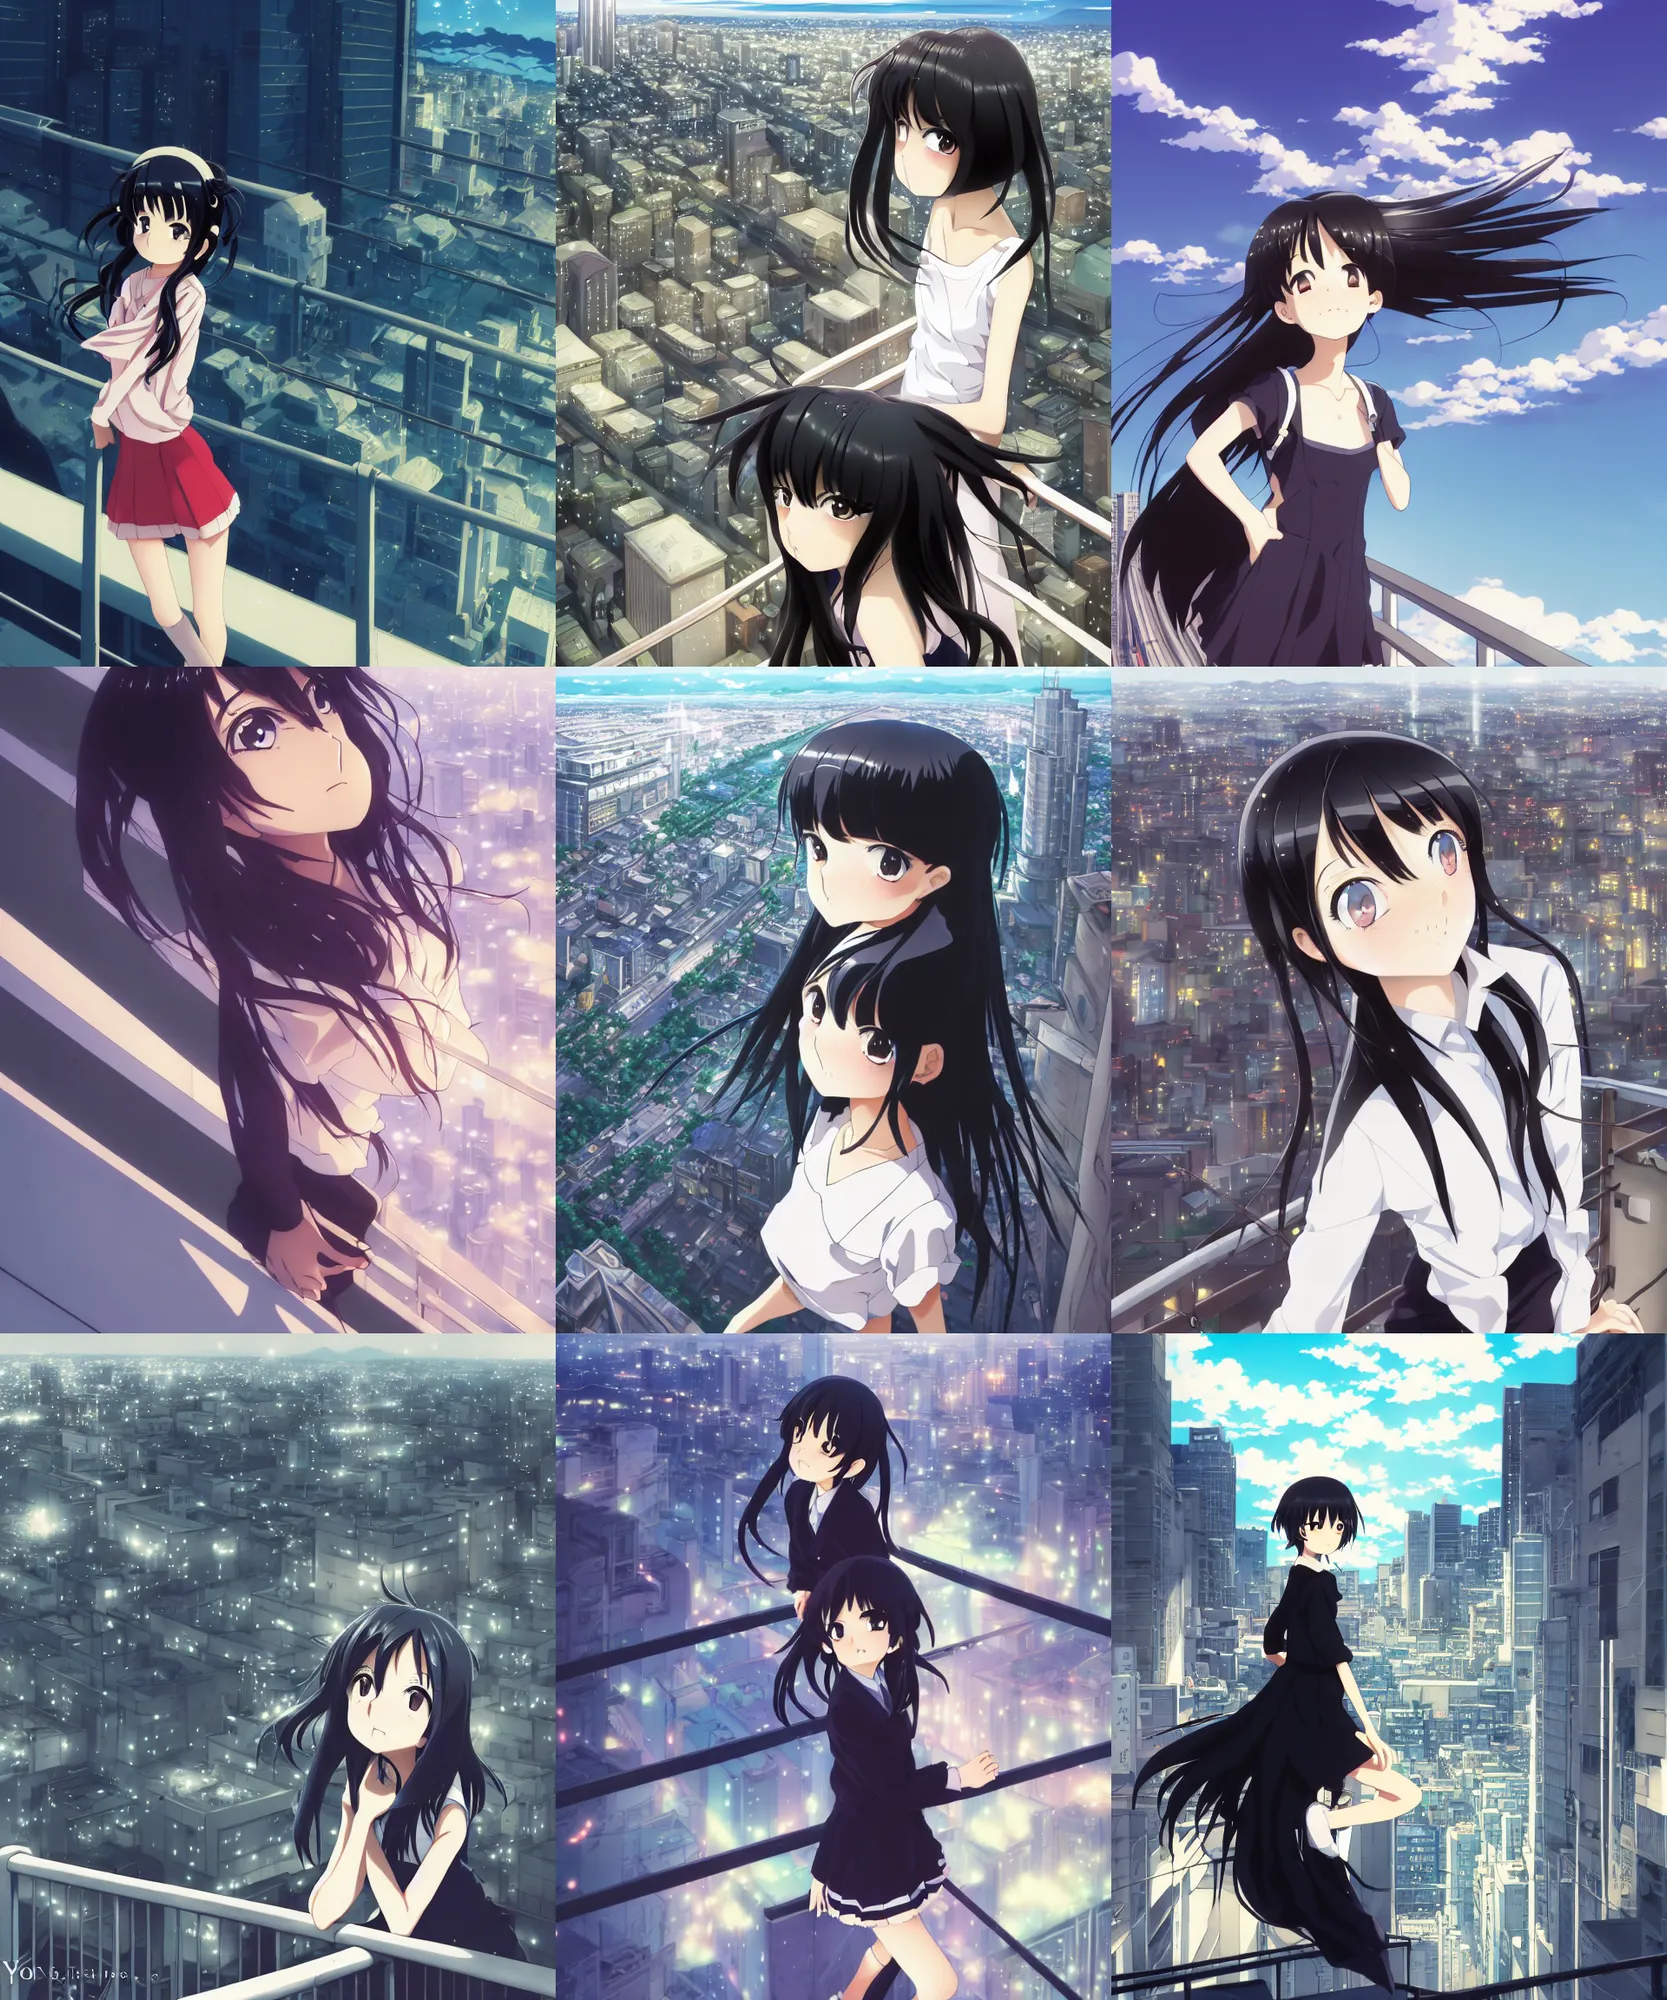 Prompt: anime visual, portrait of a young black haired girl sightseeing above the city, guardrail, cute face by yoh yoshinari, katsura masakazu, dramatic lighting, dynamic pose, dynamic perspective, strong silhouette, ilya kuvshinov, anime cels, 1 8 mm lens, fstop of 8, rounded eyes, moody, detailed facial features